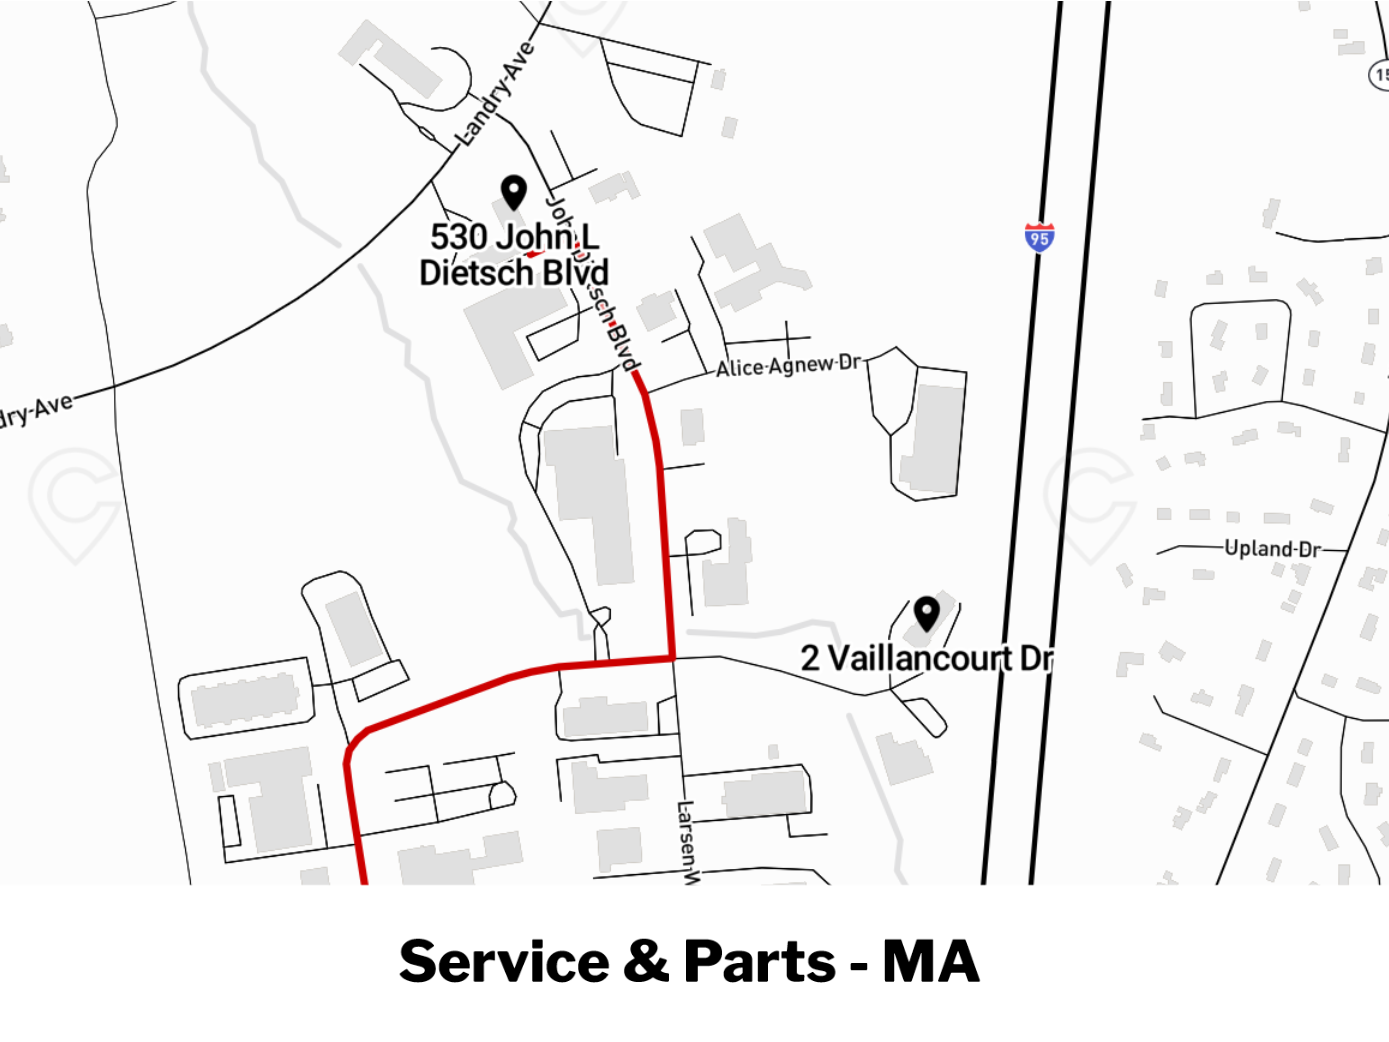 Directions to Service & Parts"